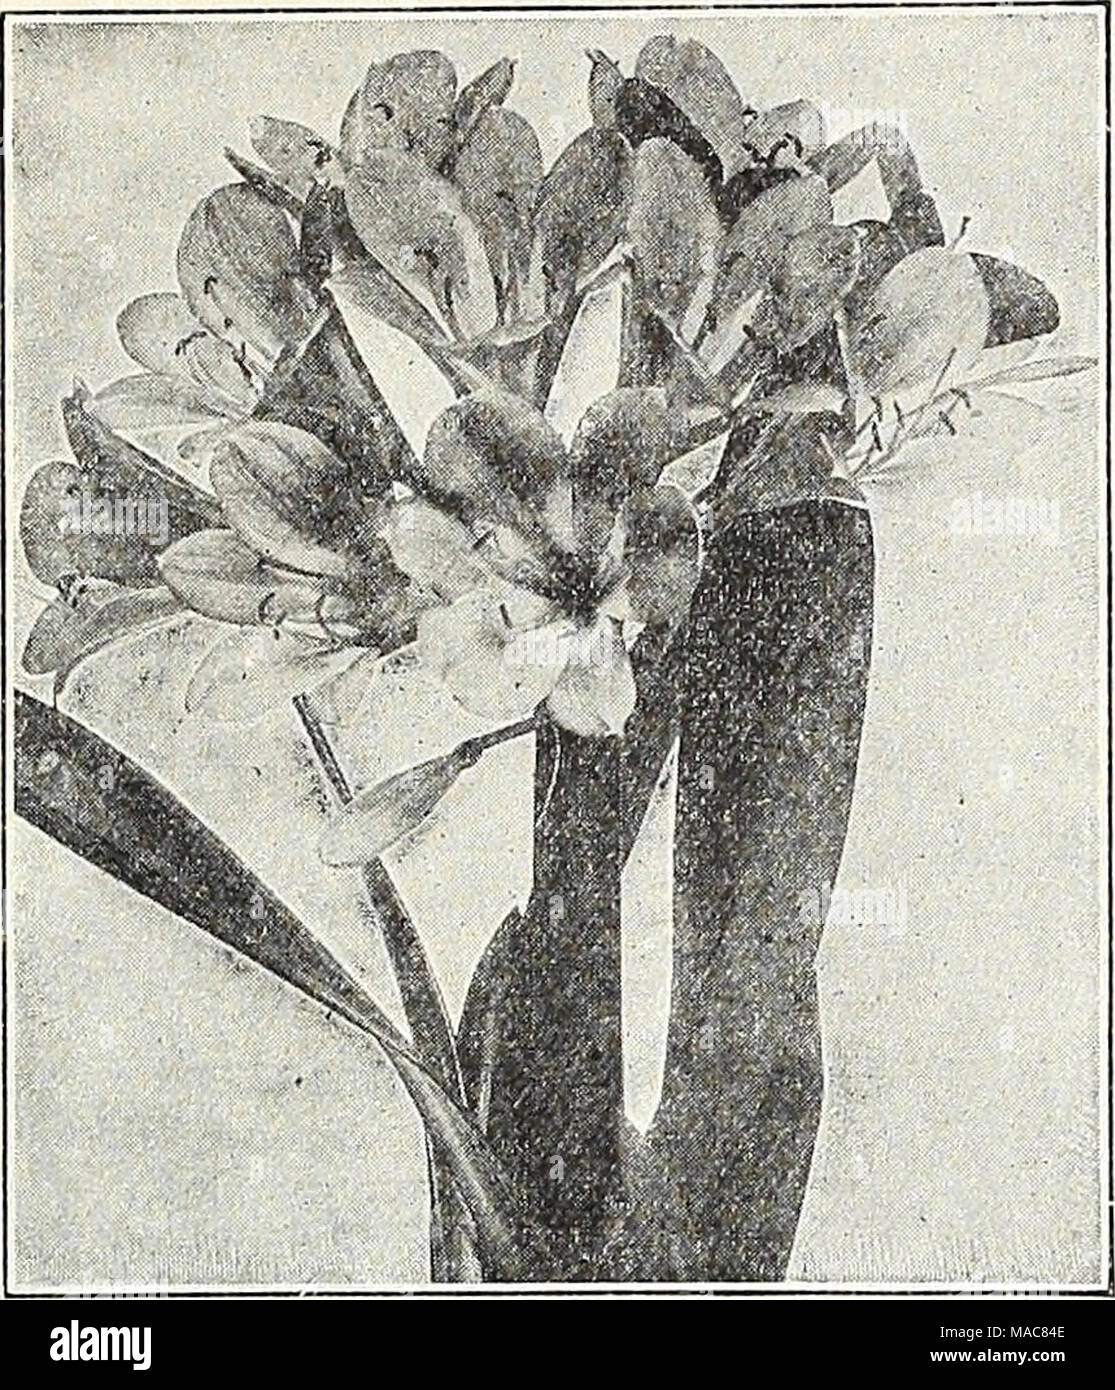 . Dreer's midsummer list 1931 . Clivia Miniata Clivia Miniata (Imantophyllum) A pretty lily-like plant of the easiest culture, a most desirable house plant, it flowers during the late winter months, remaining in bloom for a long period. The flowers are about 2 inches long, and are borne in dense clusters from 10 to 20 flowers each; in color it is of a fine orange-red, shading to buff. 4-inch pots, $1.00; 5-inch pots, $2.00; 6-inch pots, $3.00 and 7-inch pots, $5.00 each. Oestrum Parqui (Night-bloomlng jessamine) An interesting tender Shrub of easy cultivation, either for pot culture or for pla Stock Photo